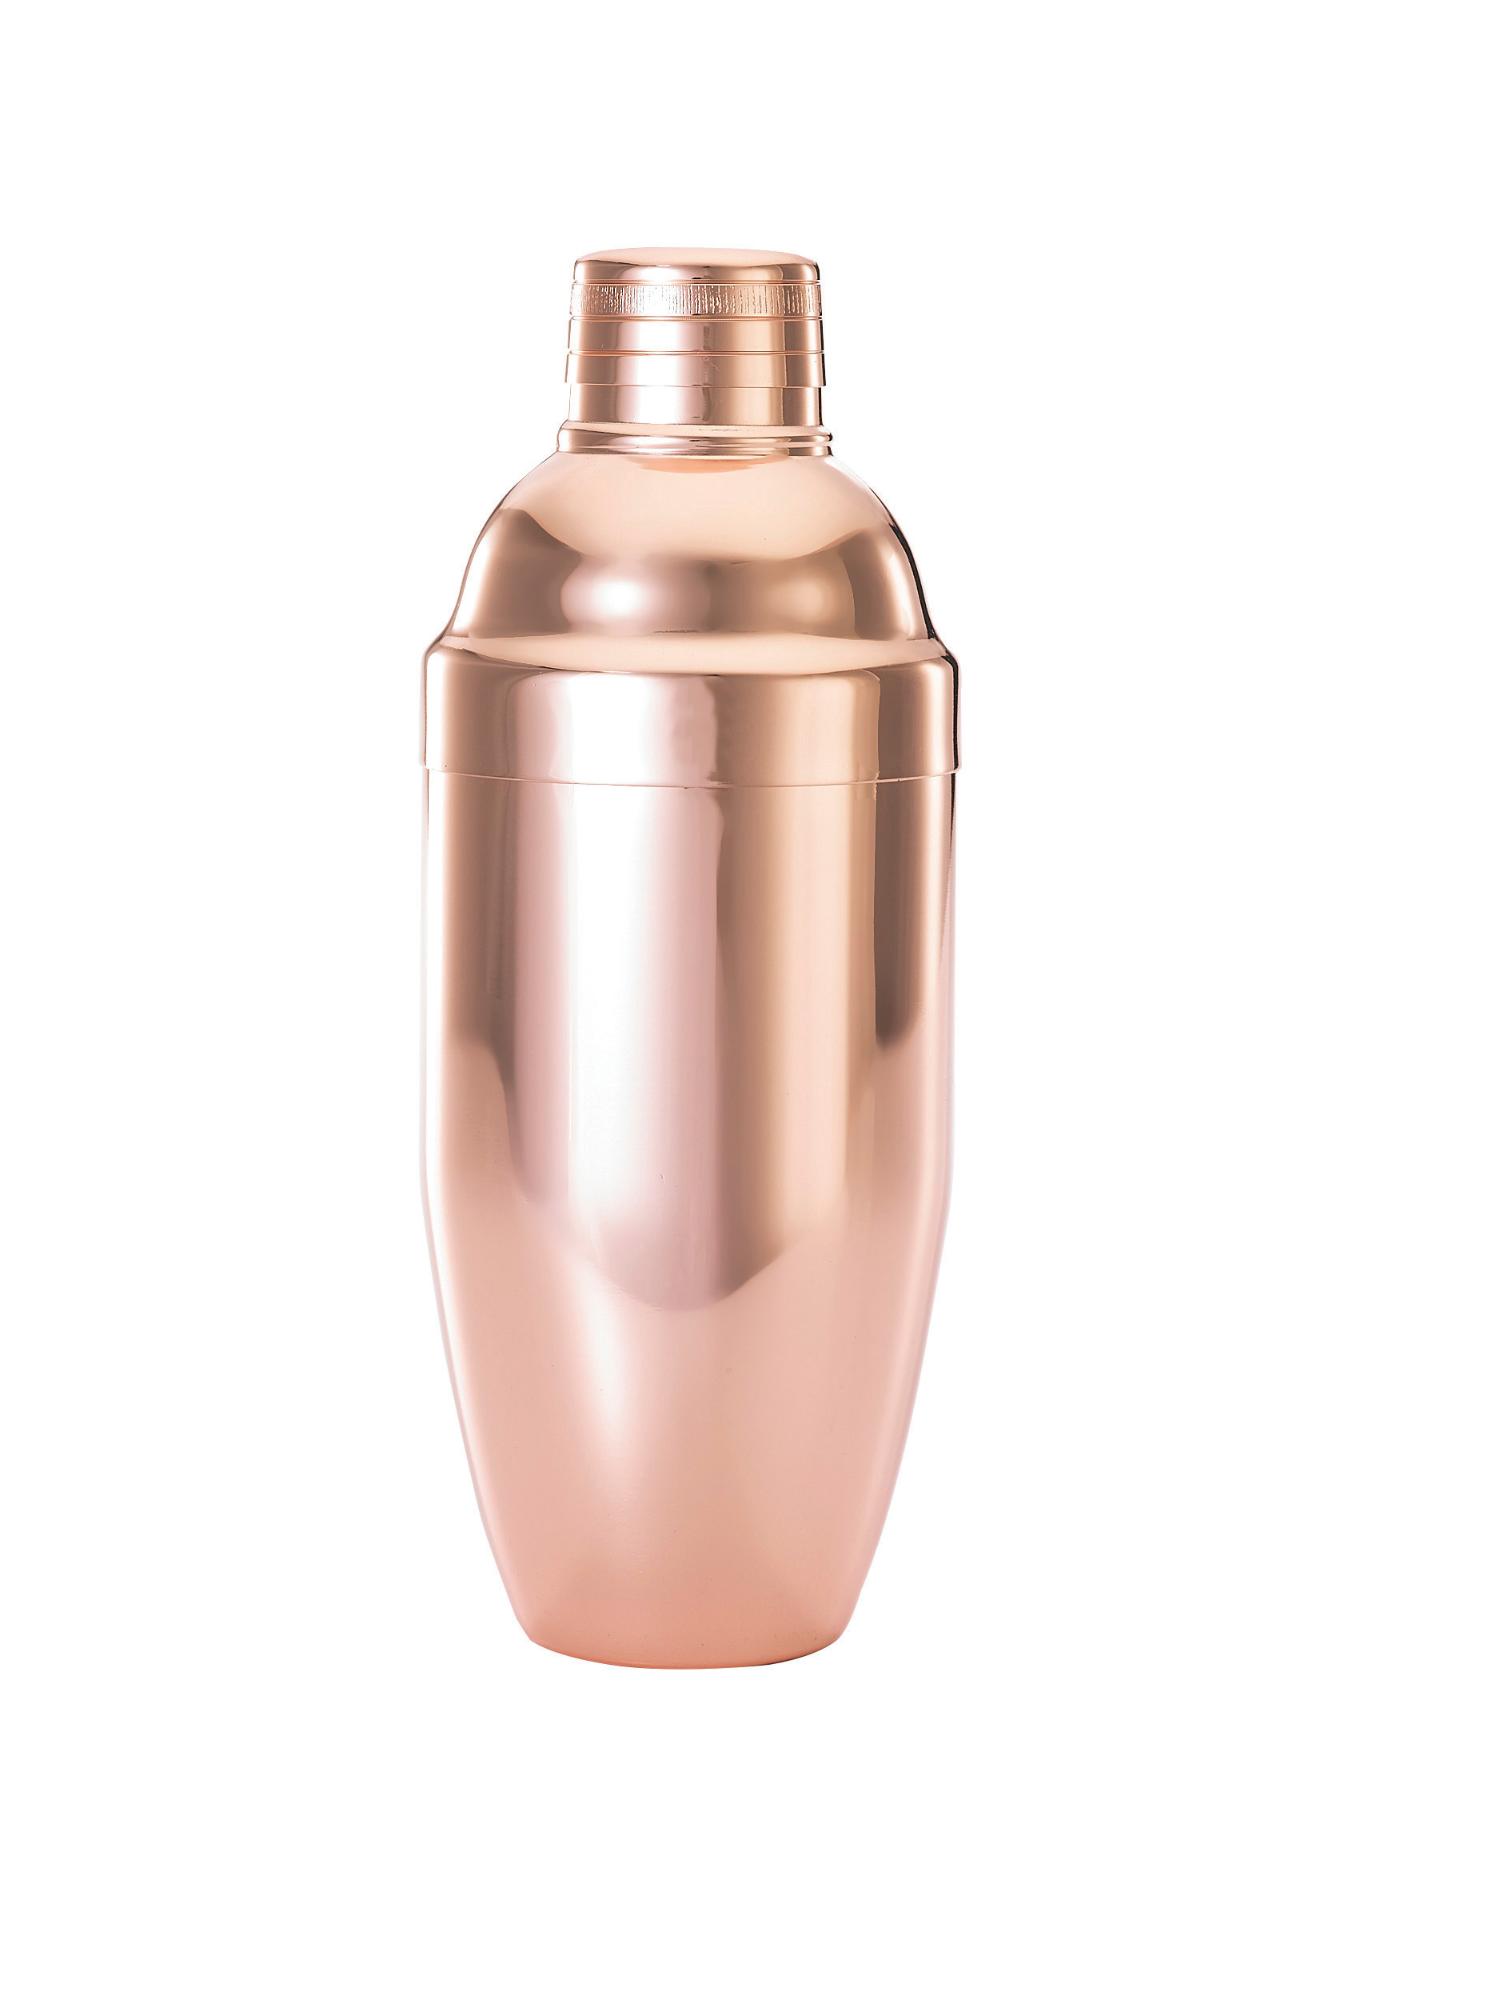 3-Pc Japanese Cocktail Shaker Set, Copper plated